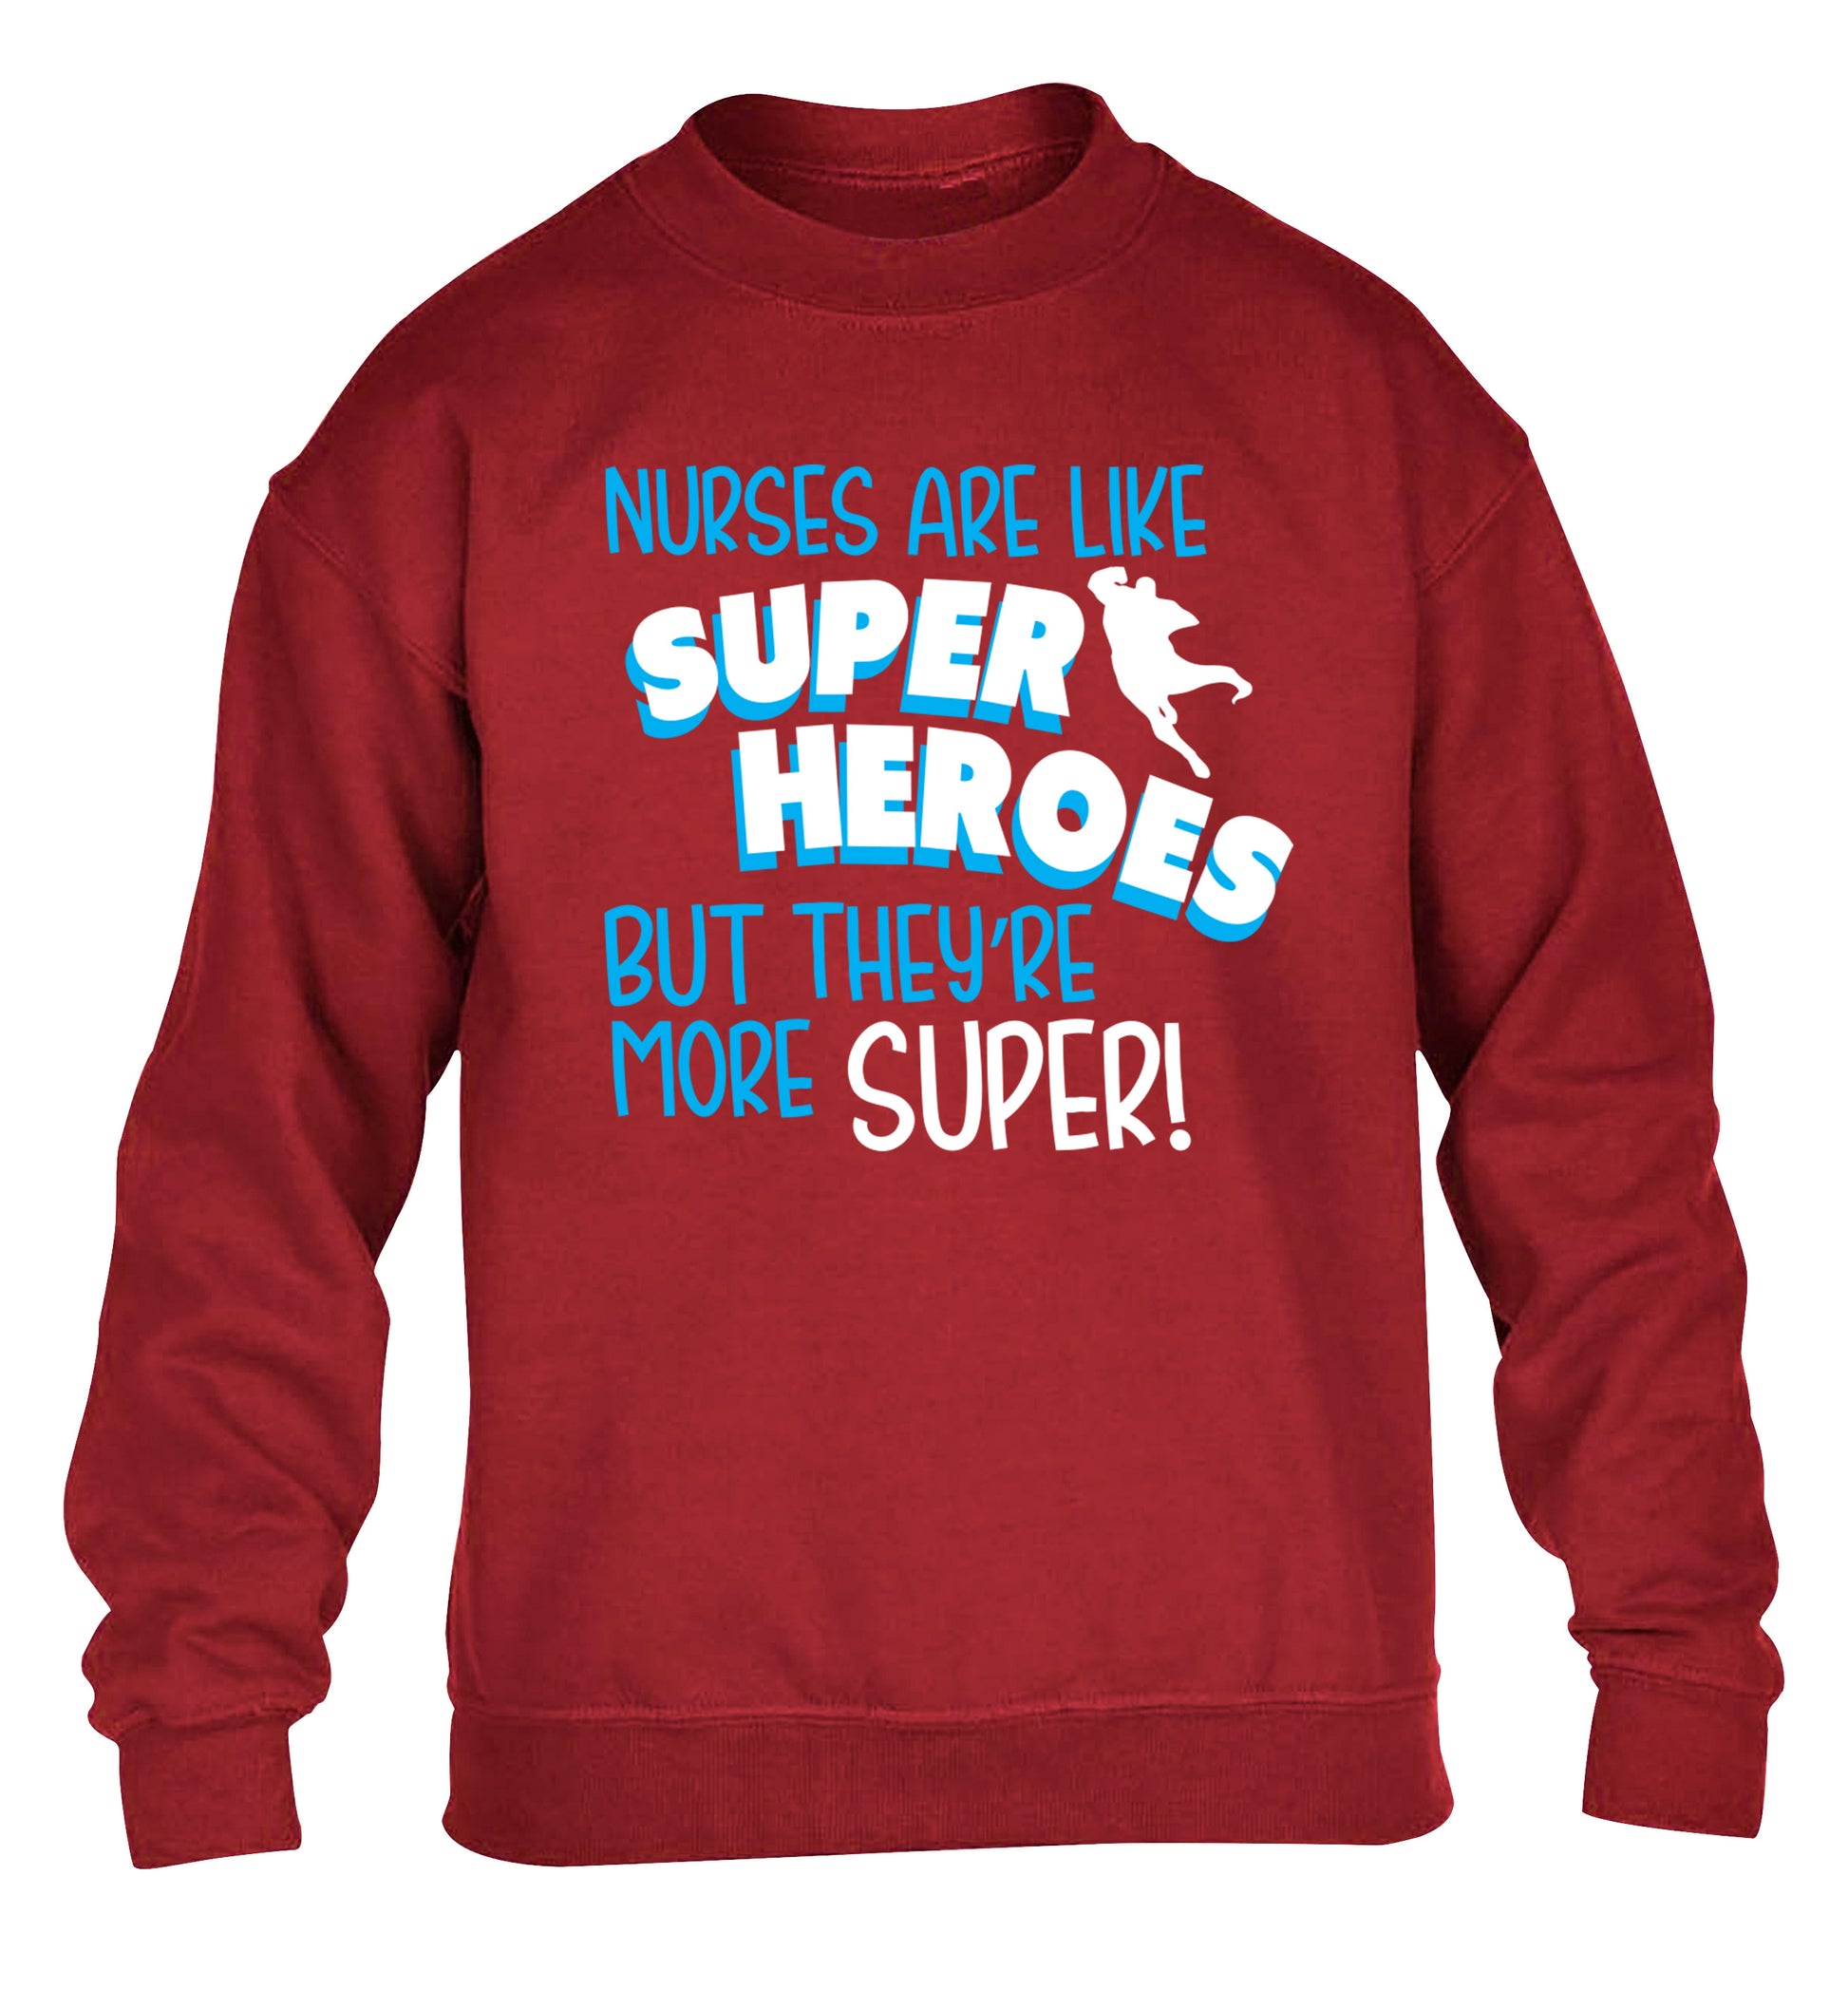 Nurses are like superheros but they're more super children's grey sweater 12-13 Years